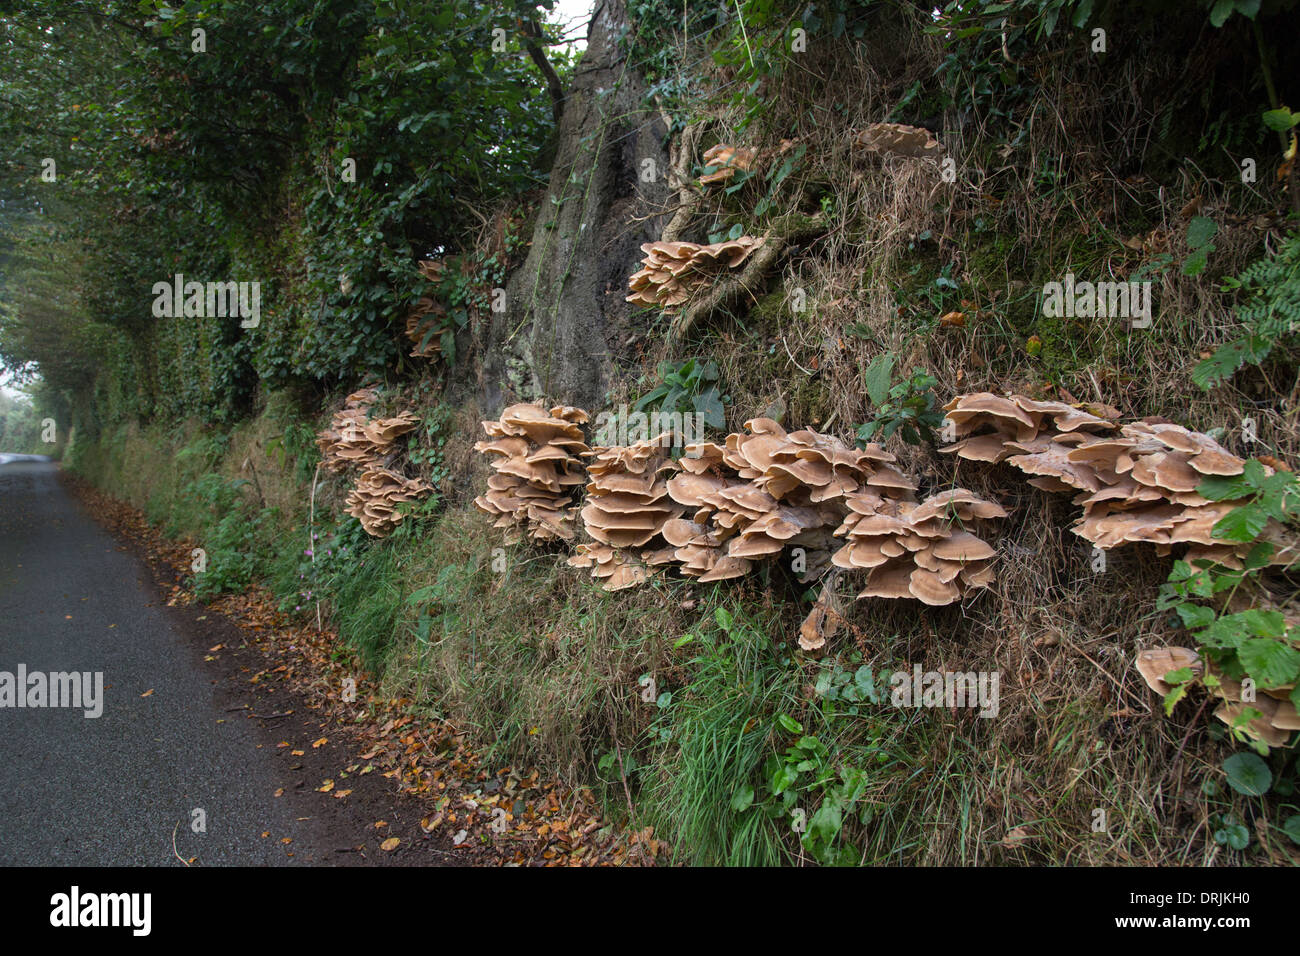 Bracket Fungus growing on an earth bank lined with Beech trees in a Devon Lane, England, UK Stock Photo